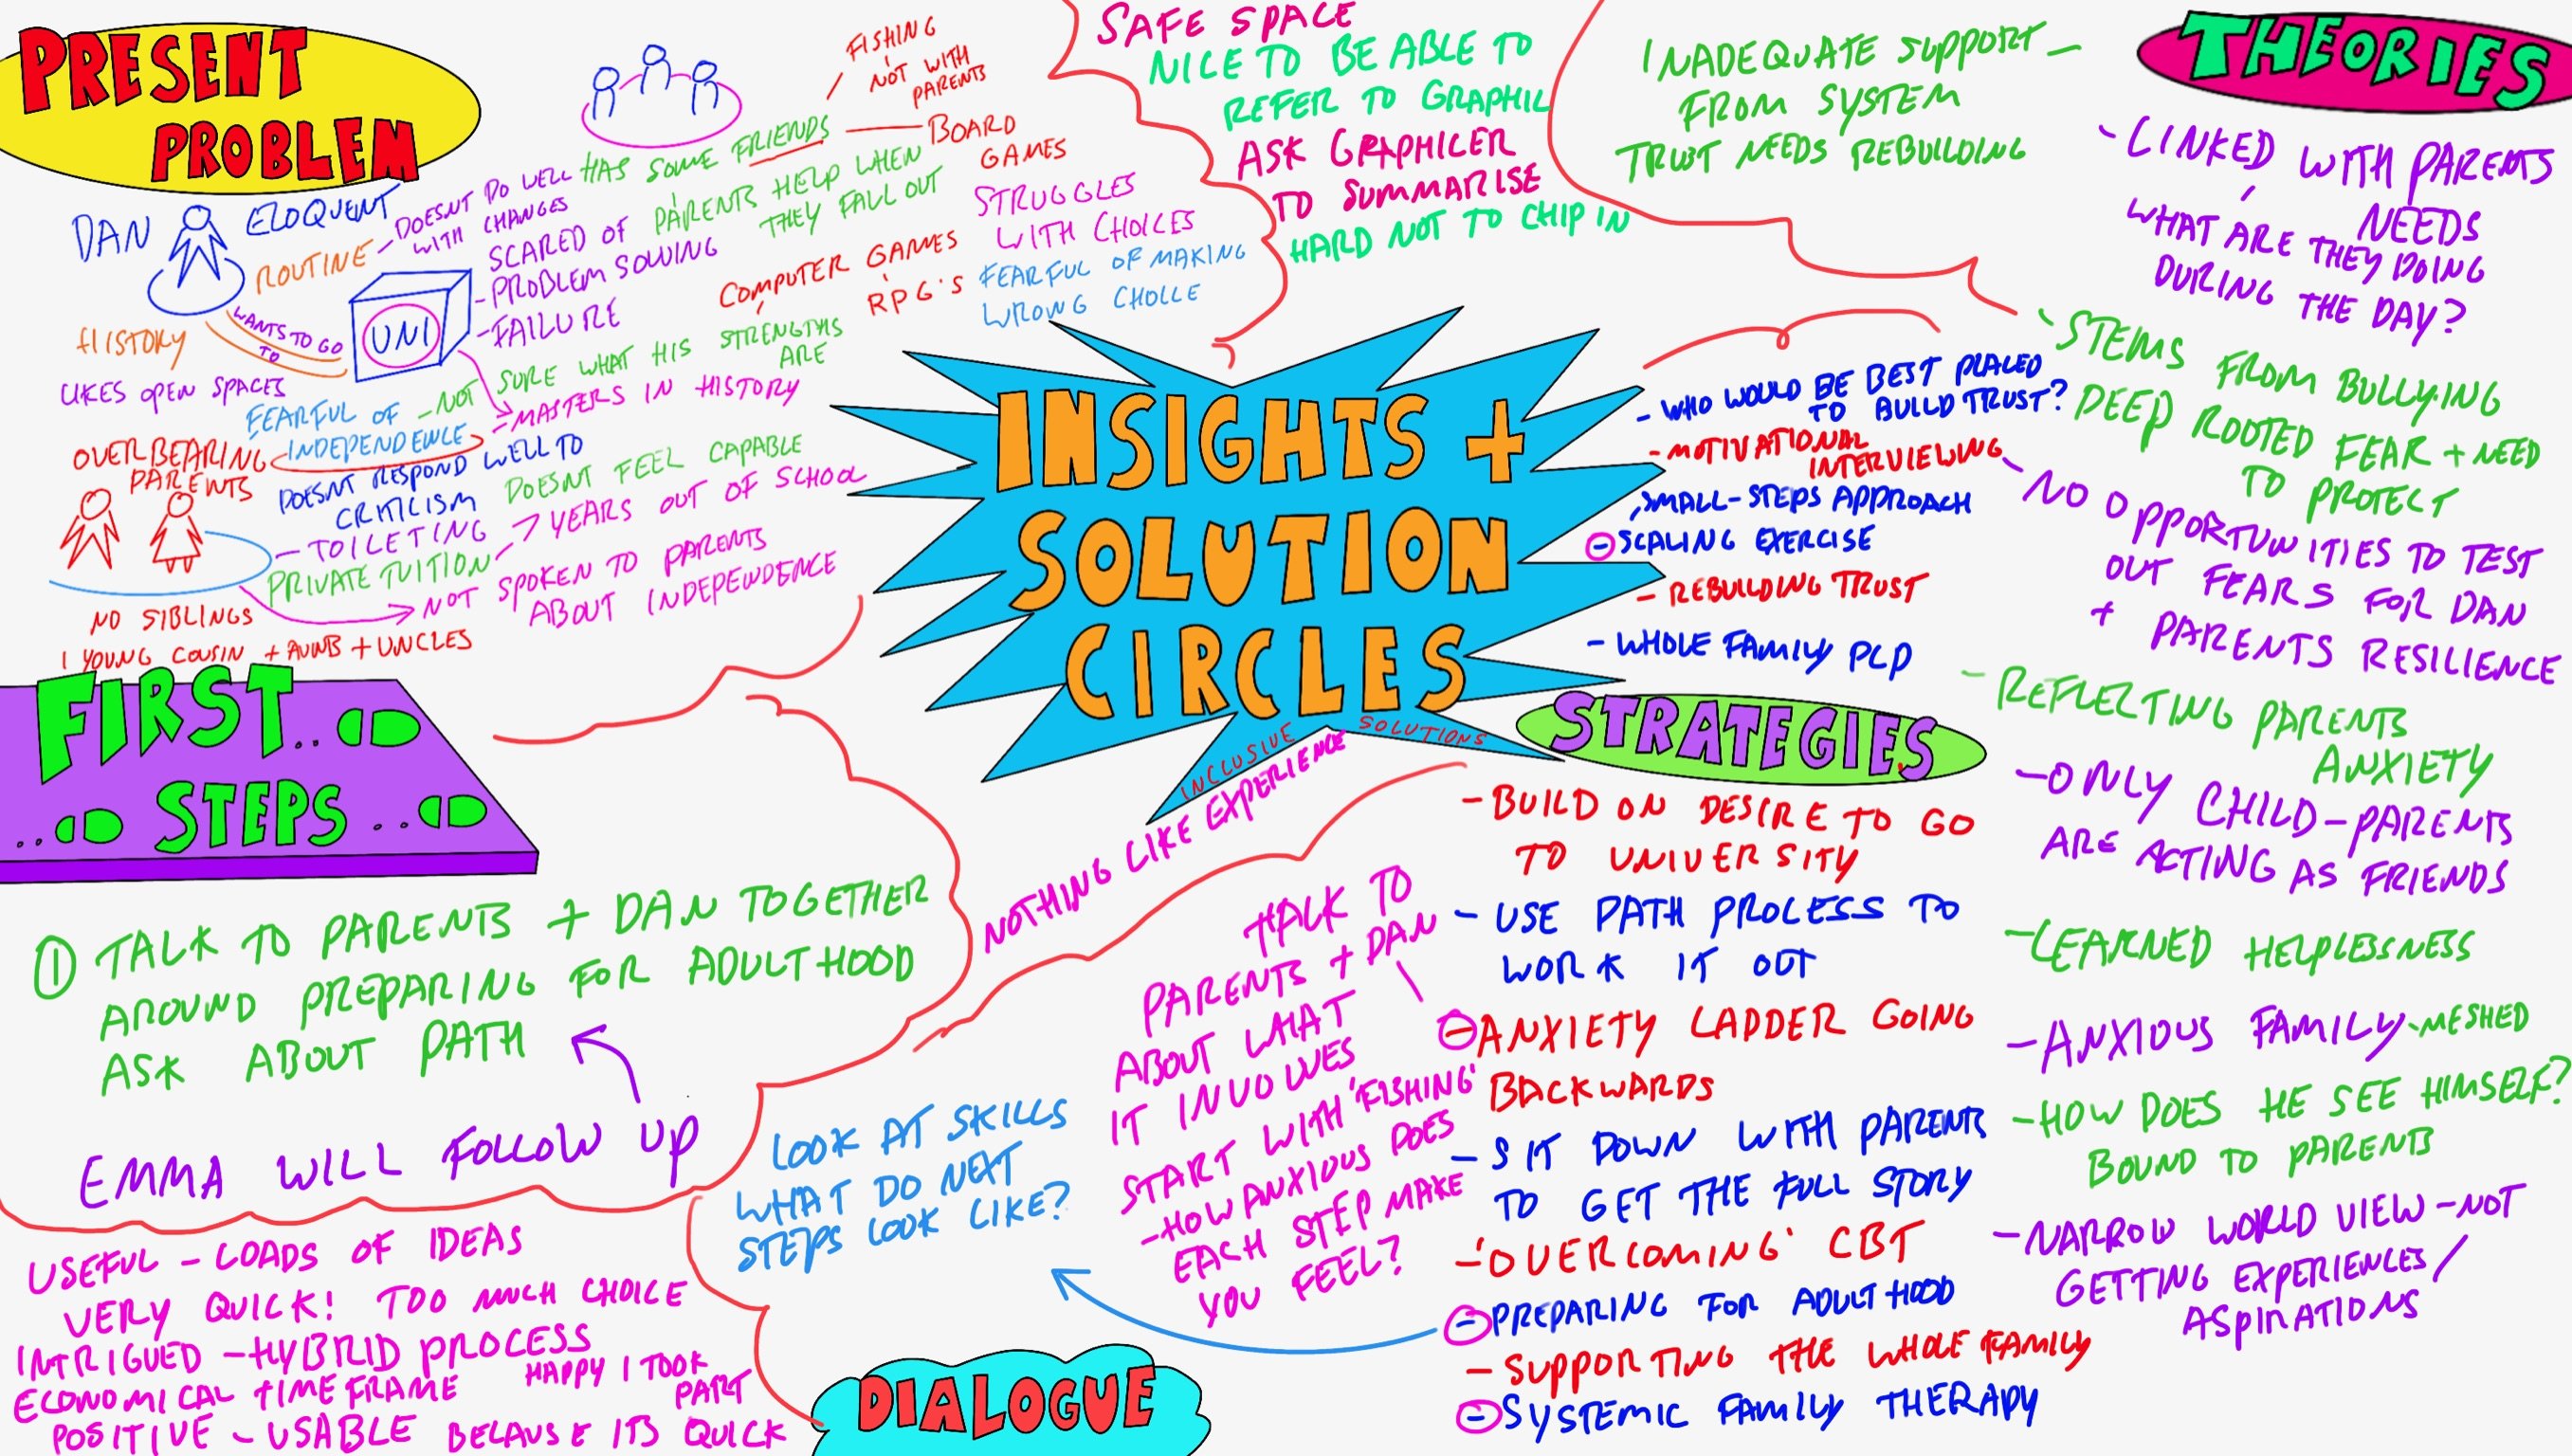 Insights and Solution Circle - Problem Solving